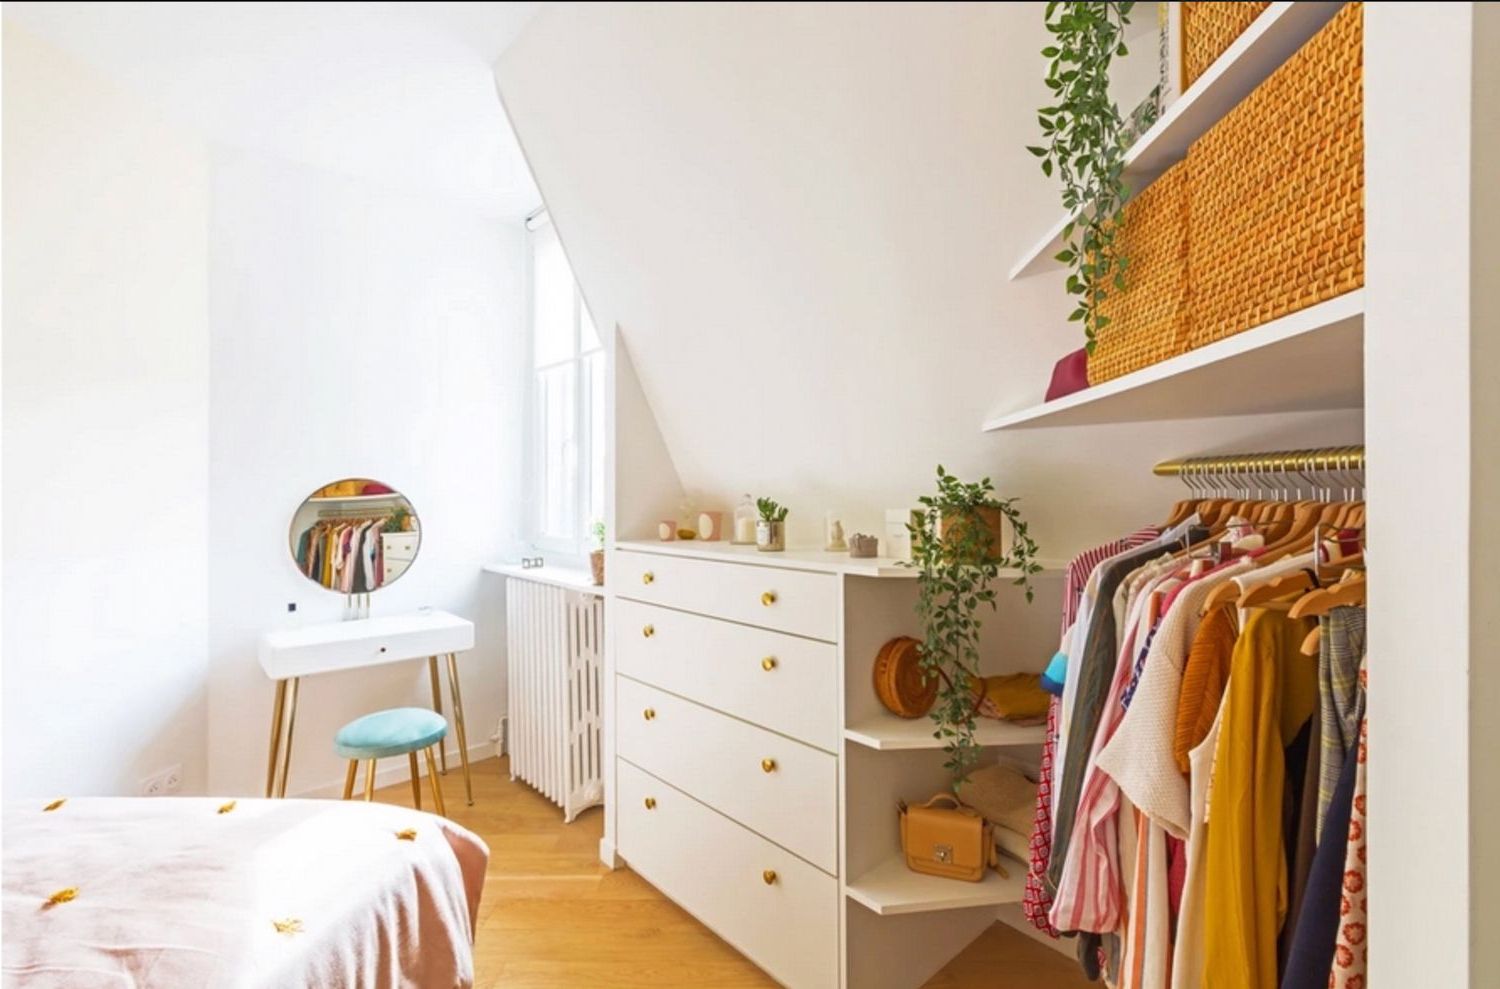 20 Clothing Storage Ideas If You Don't Have A Closet In Standing Closet Clothes Storage Wardrobes (View 16 of 20)